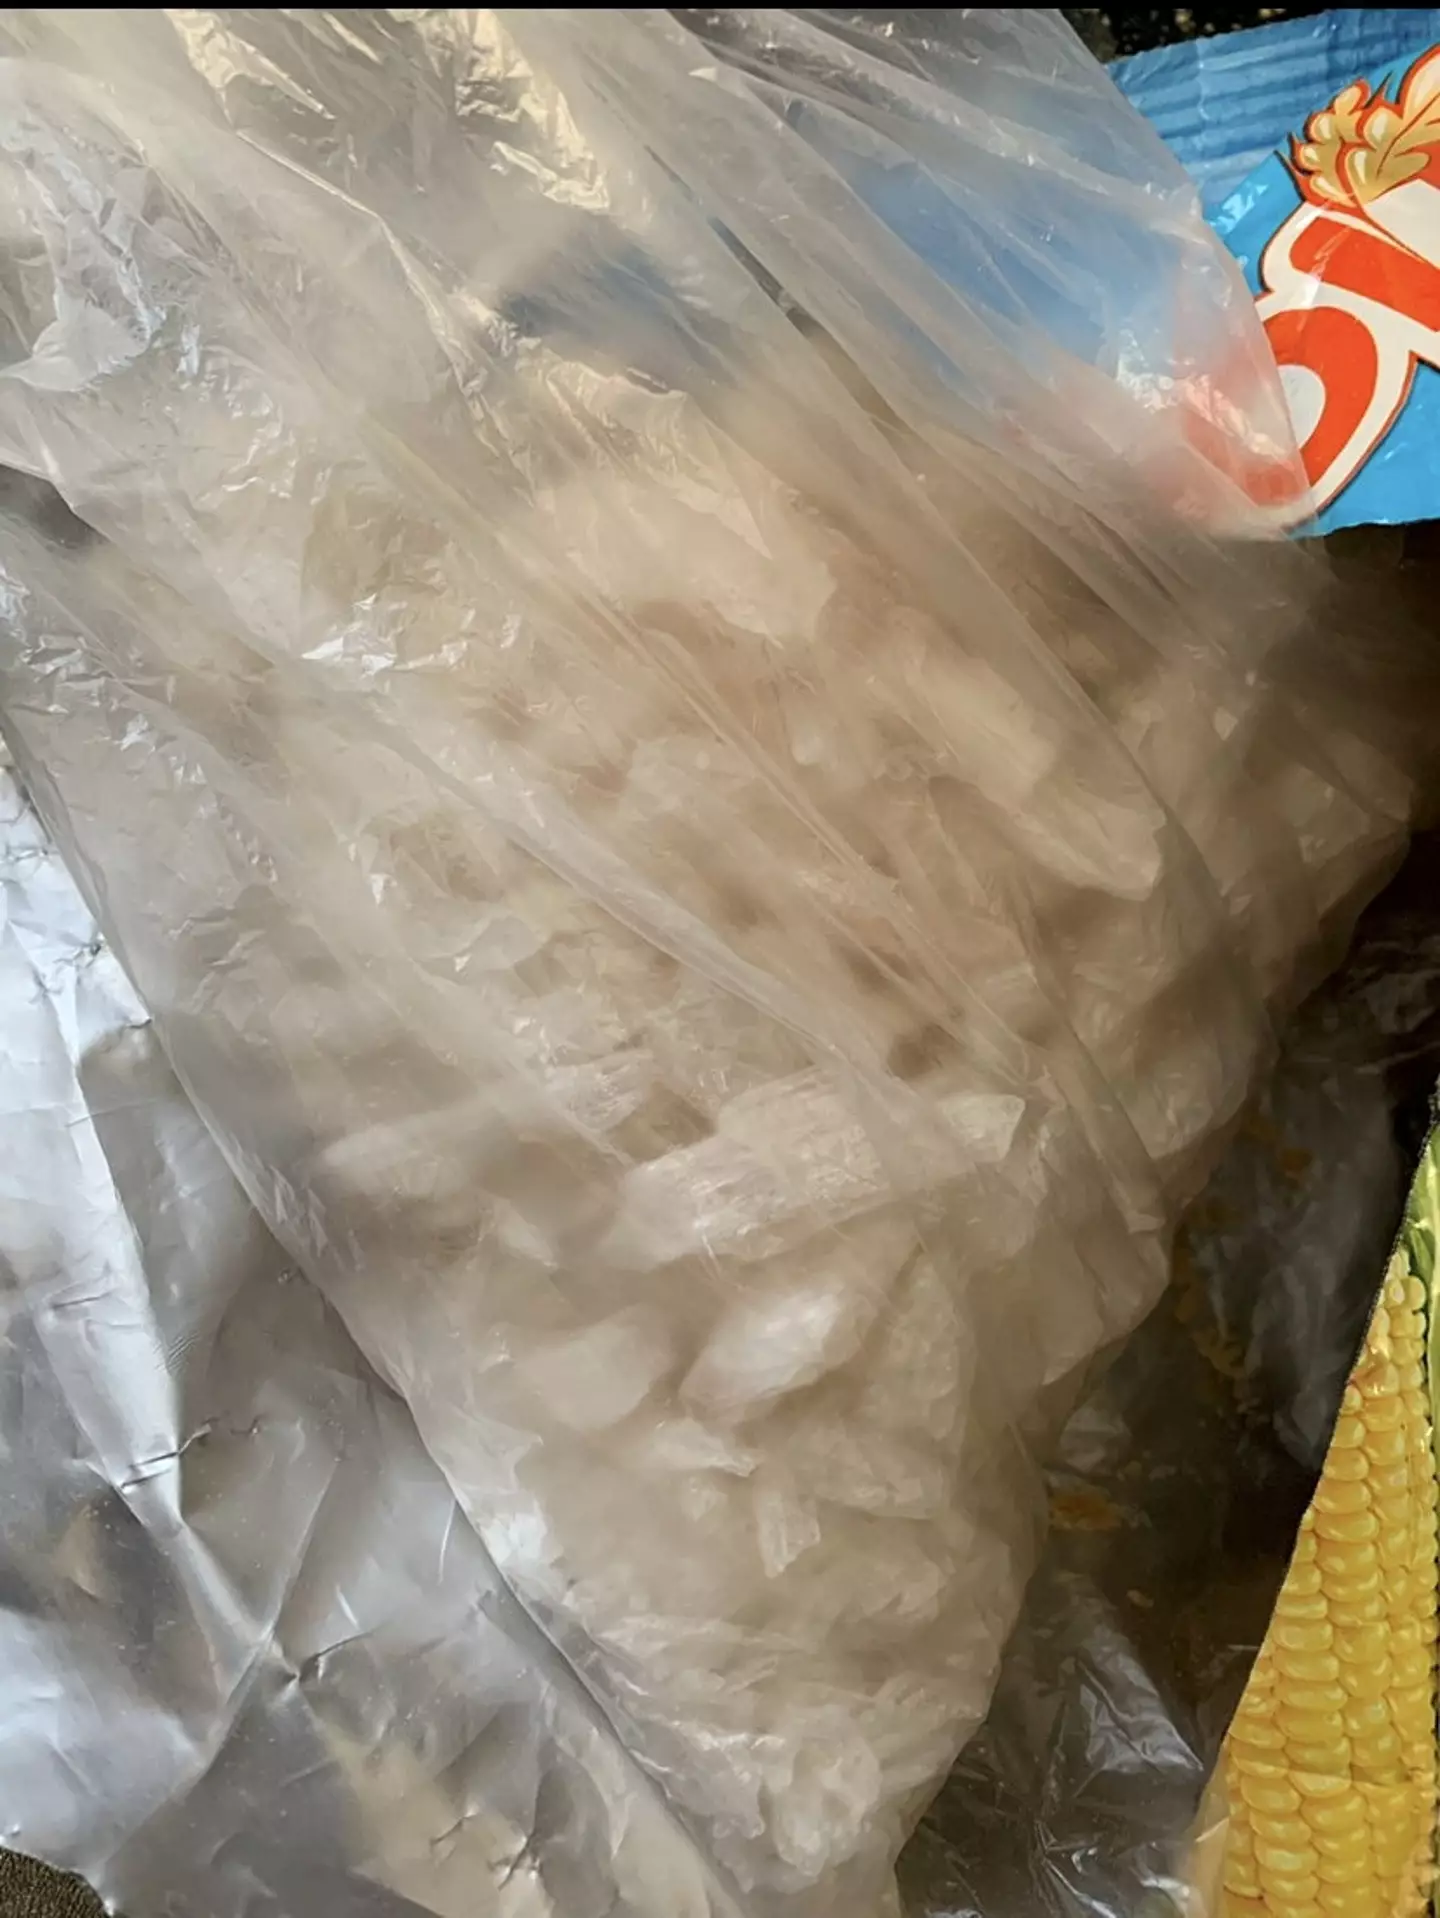 The mystery bag of crystals inside the cereal box.